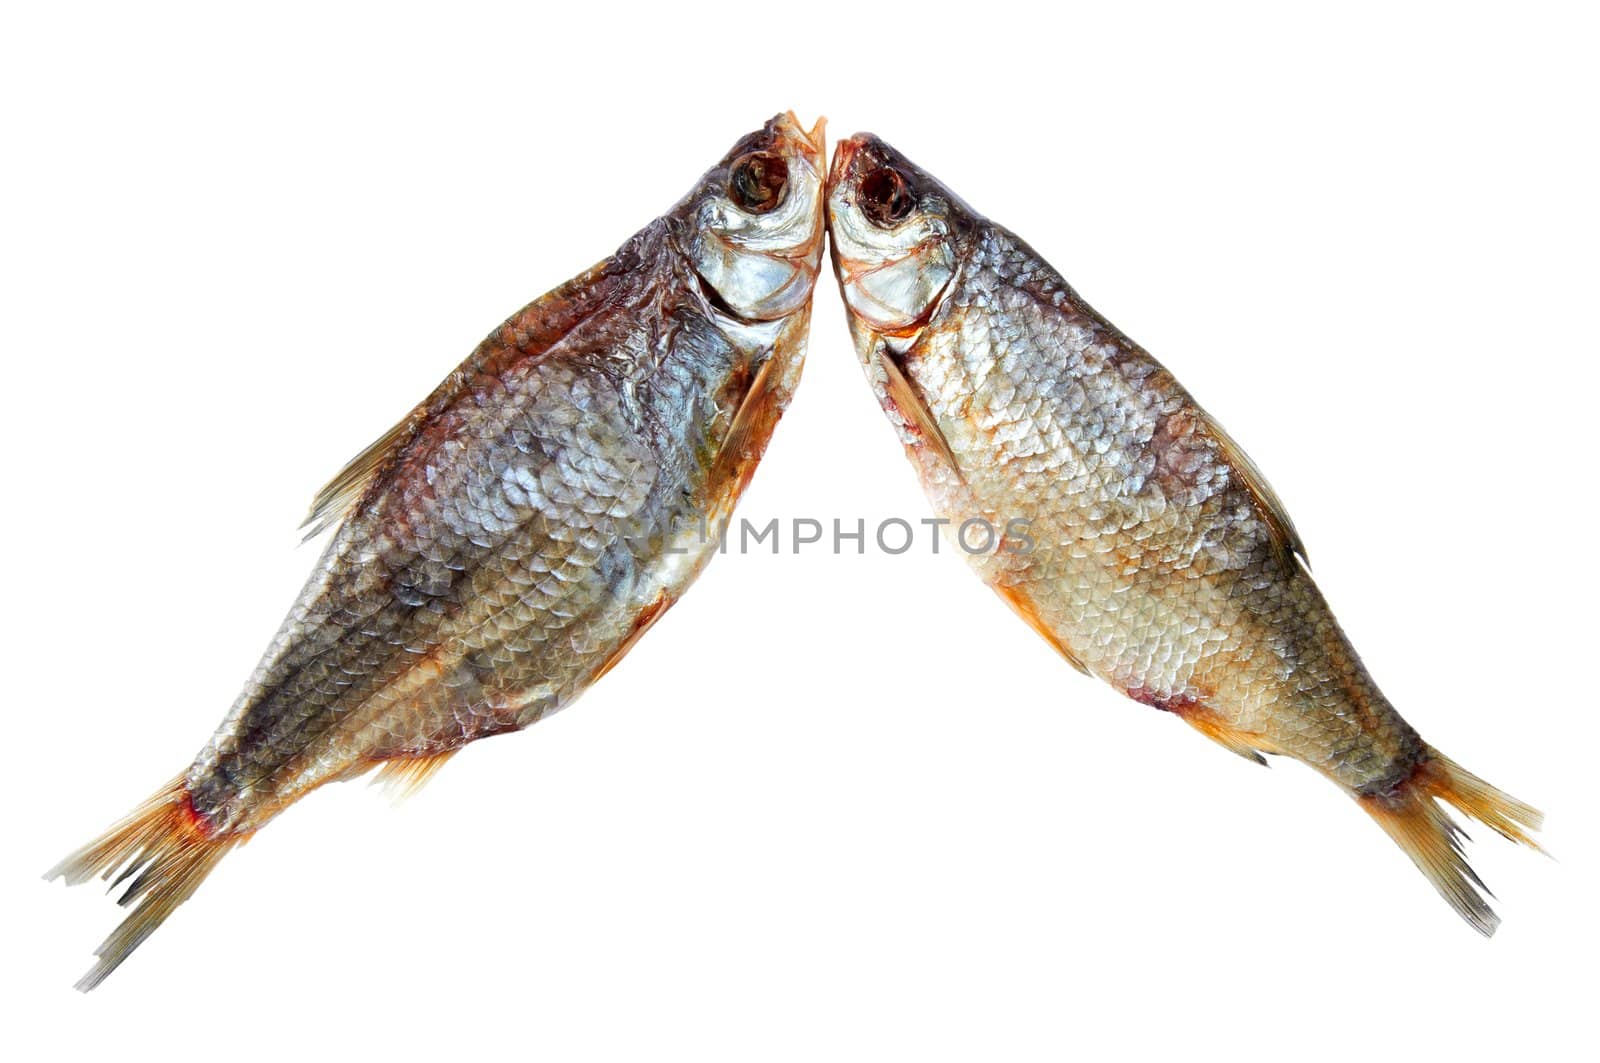 Composition from two dried fishes on a white background